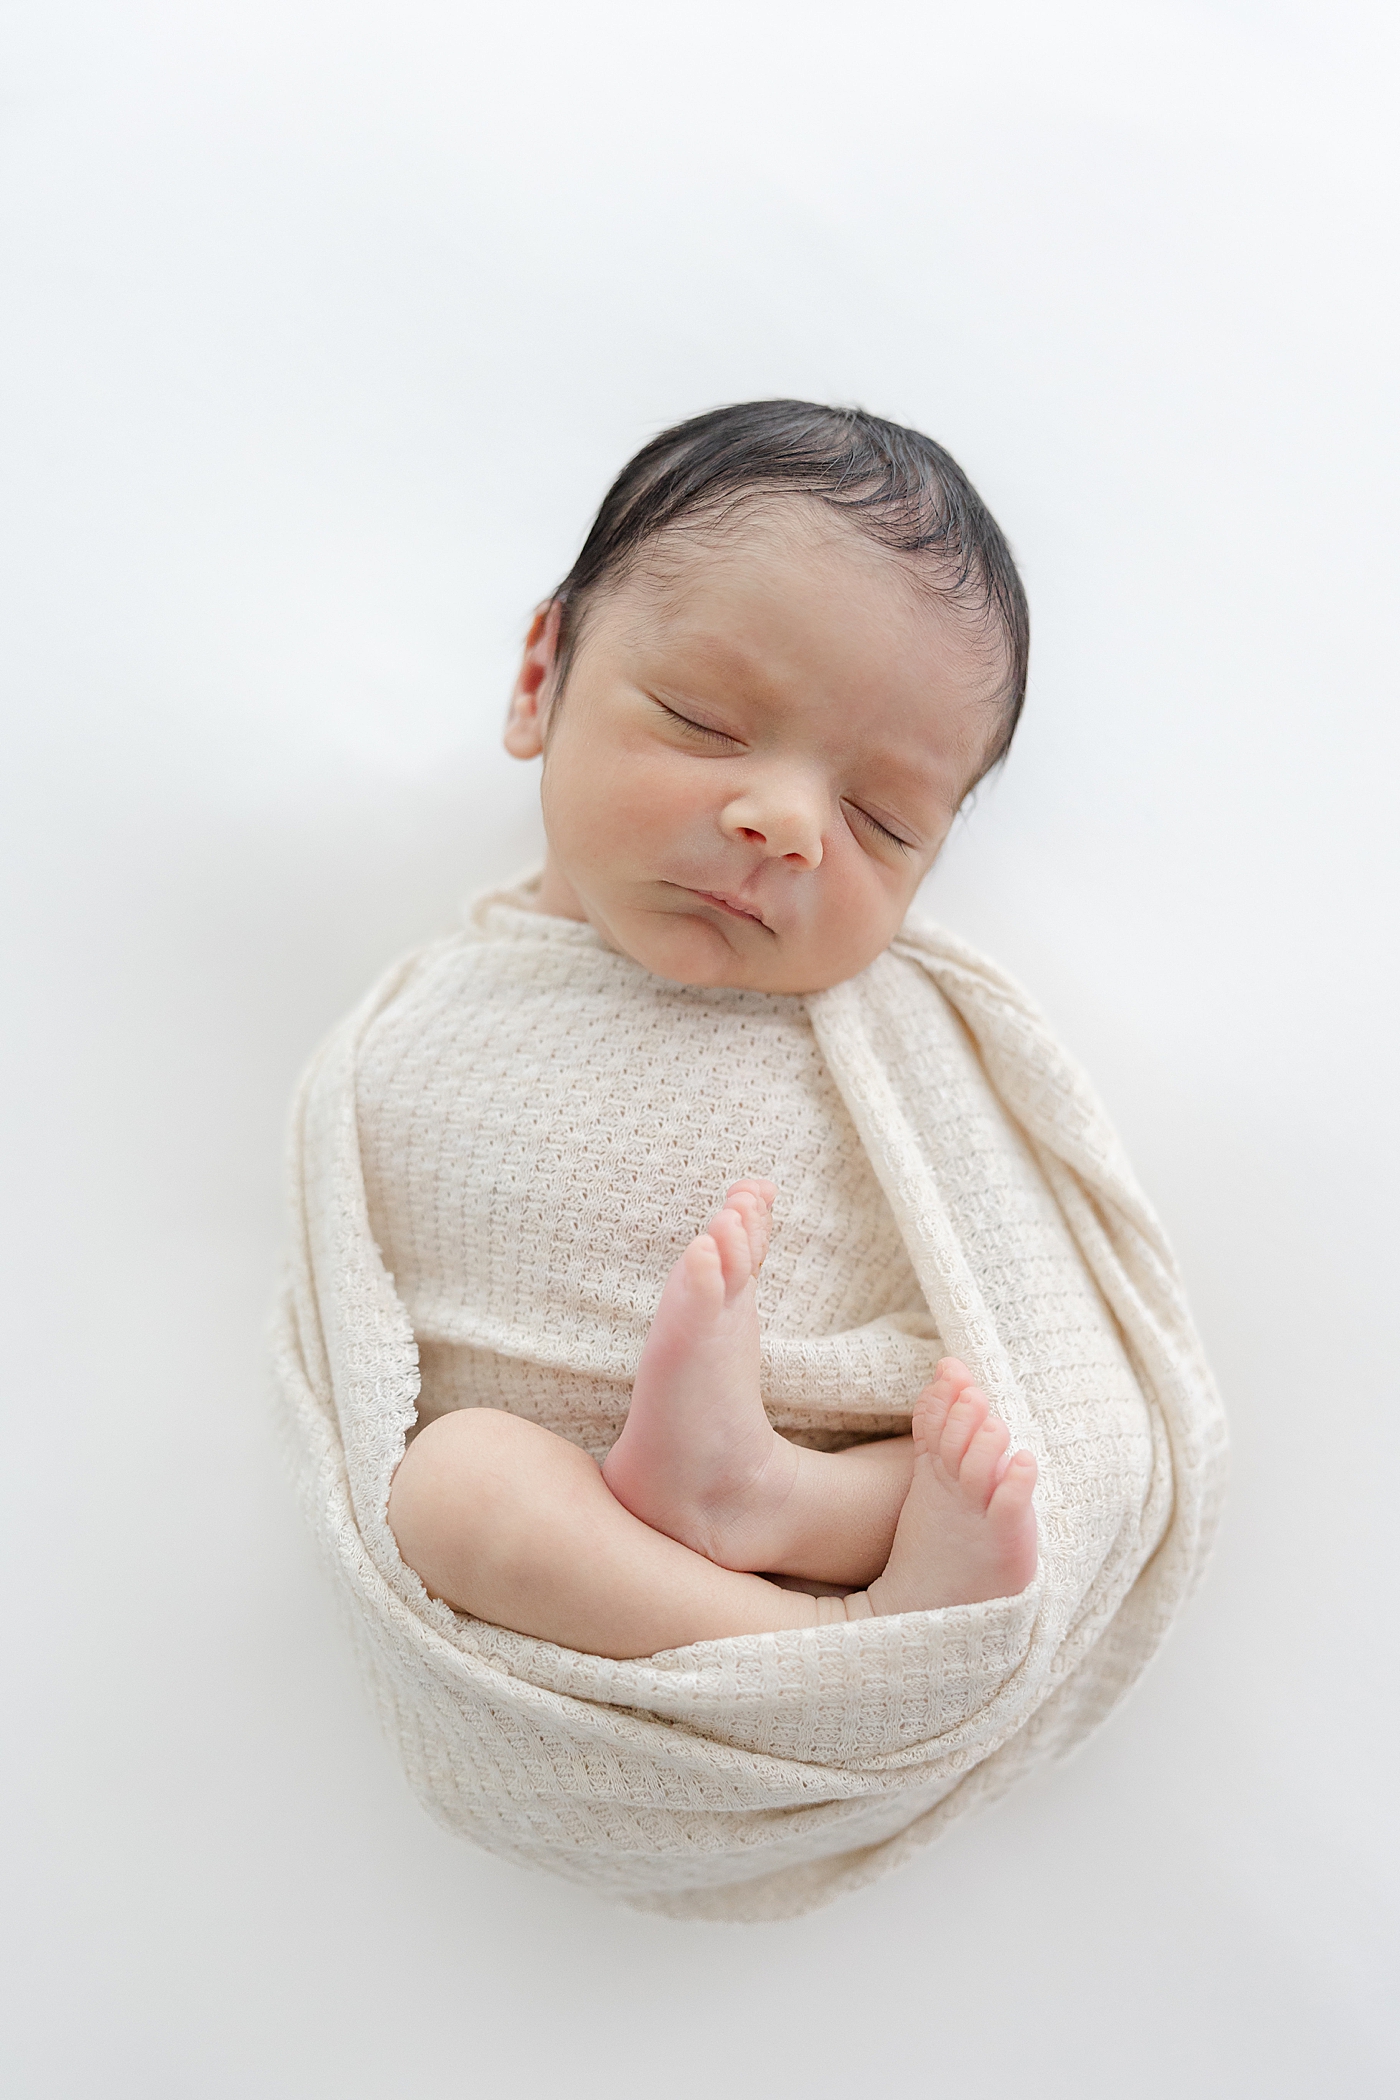 Sleeping newborn baby wrapped in a white swaddle | Image by Sana Ahmed Photography 